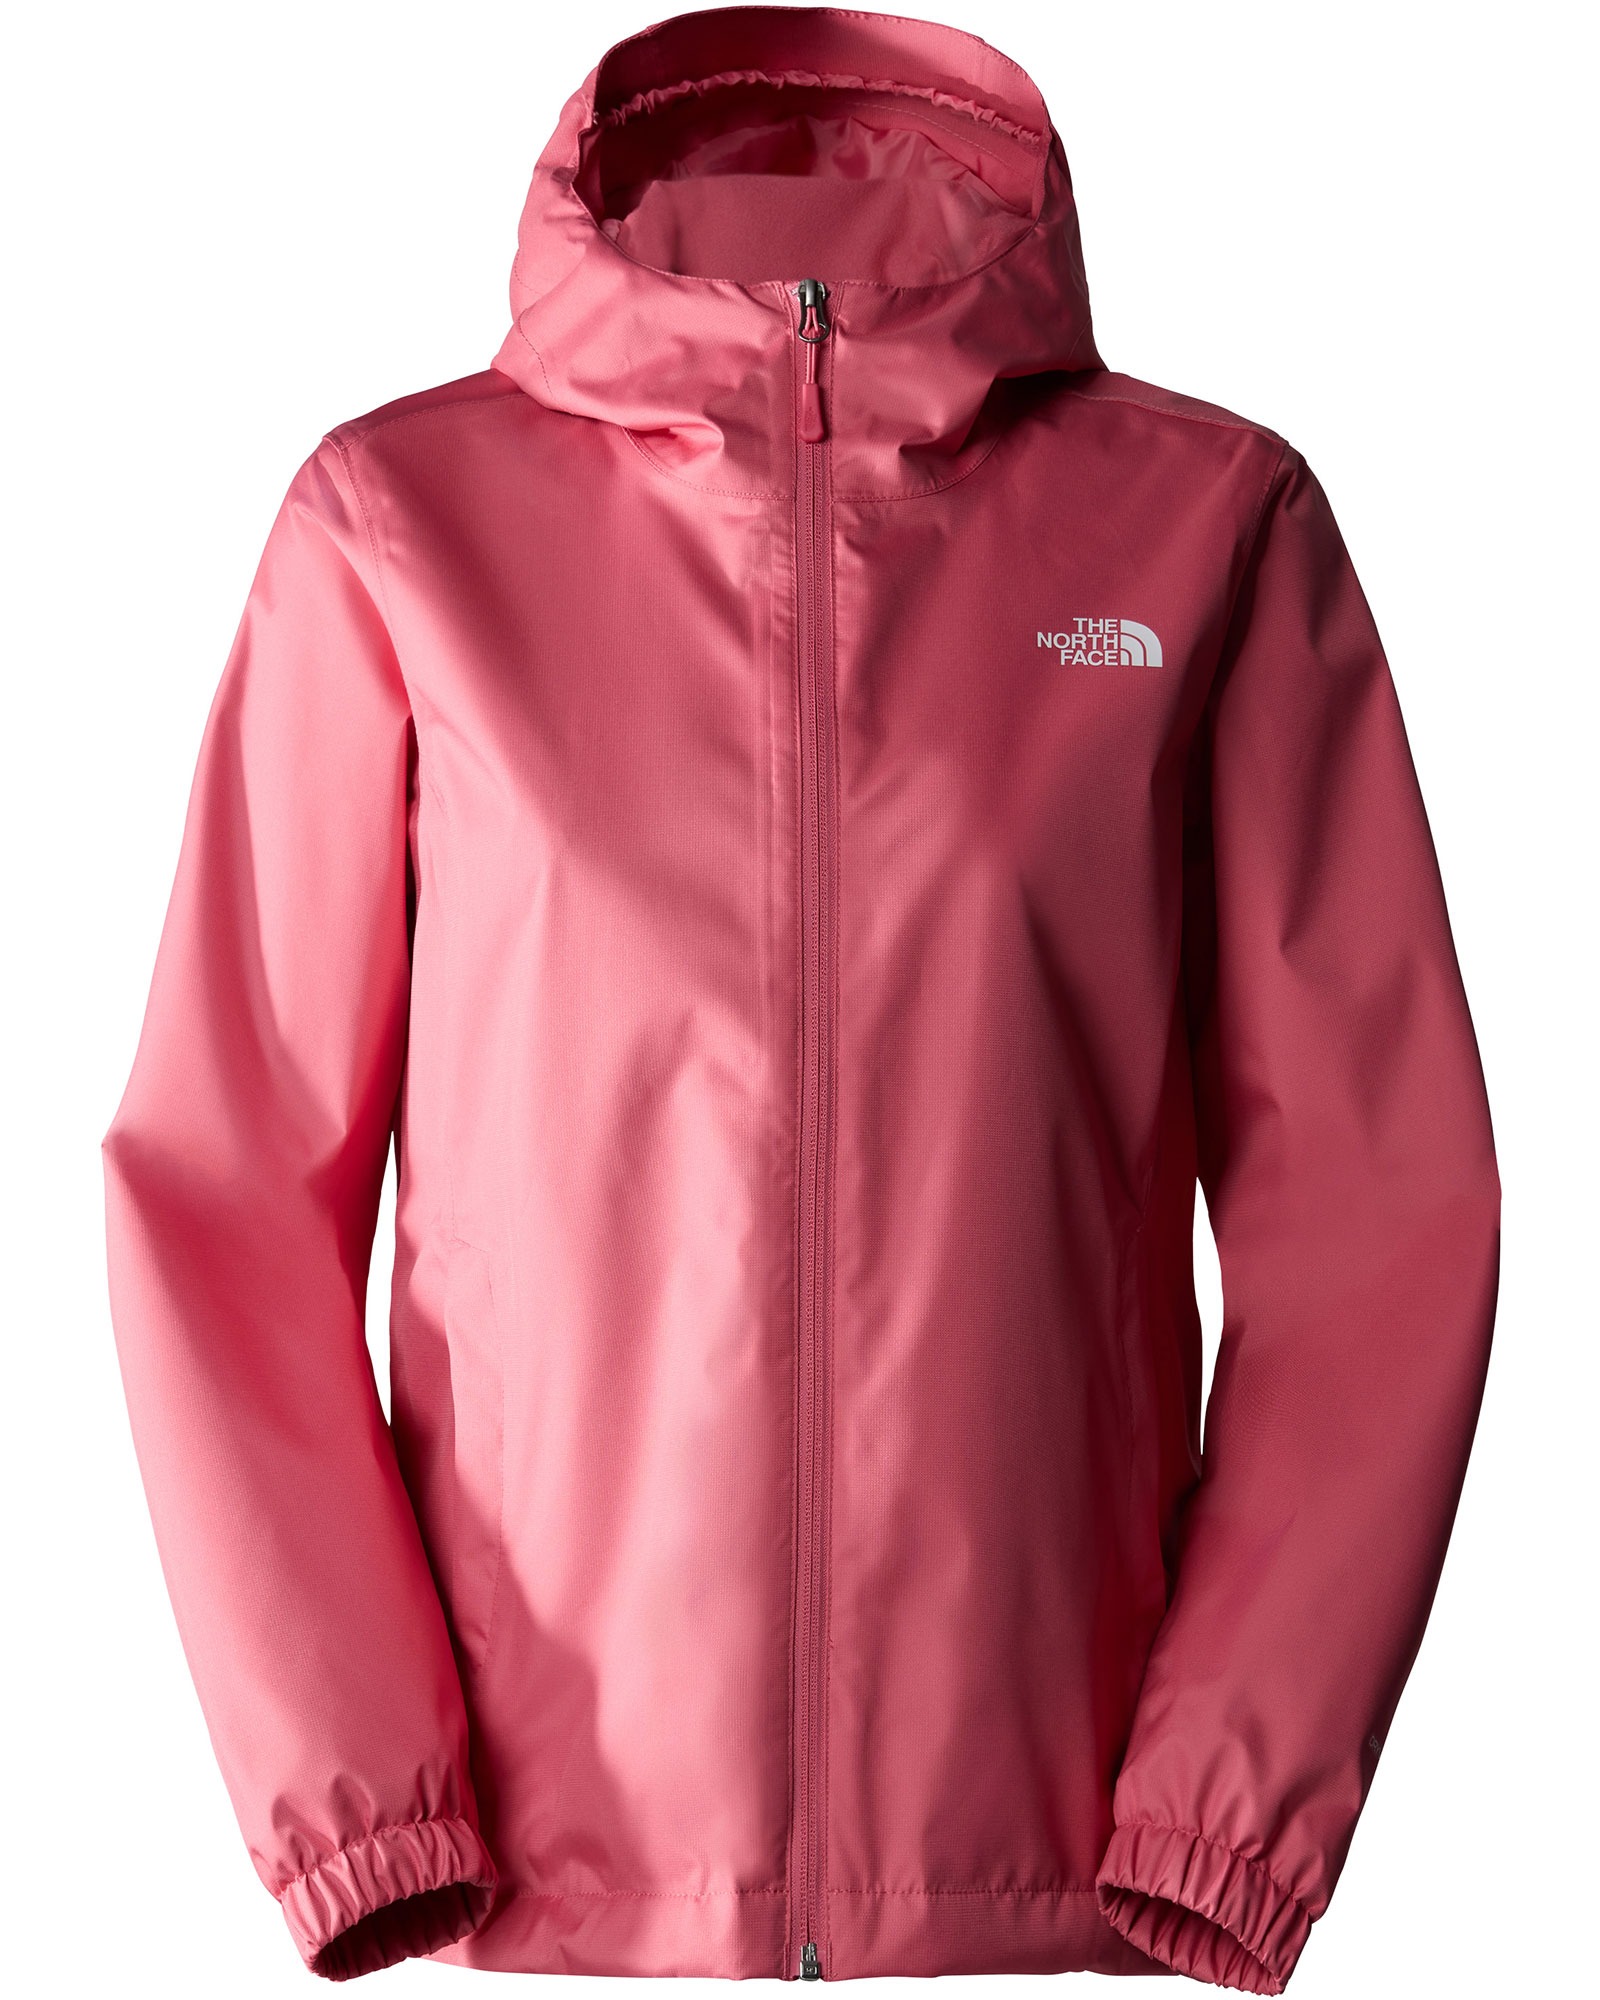 The North Face Quest DryVent Women’s Jacket - Cosmo Pink S